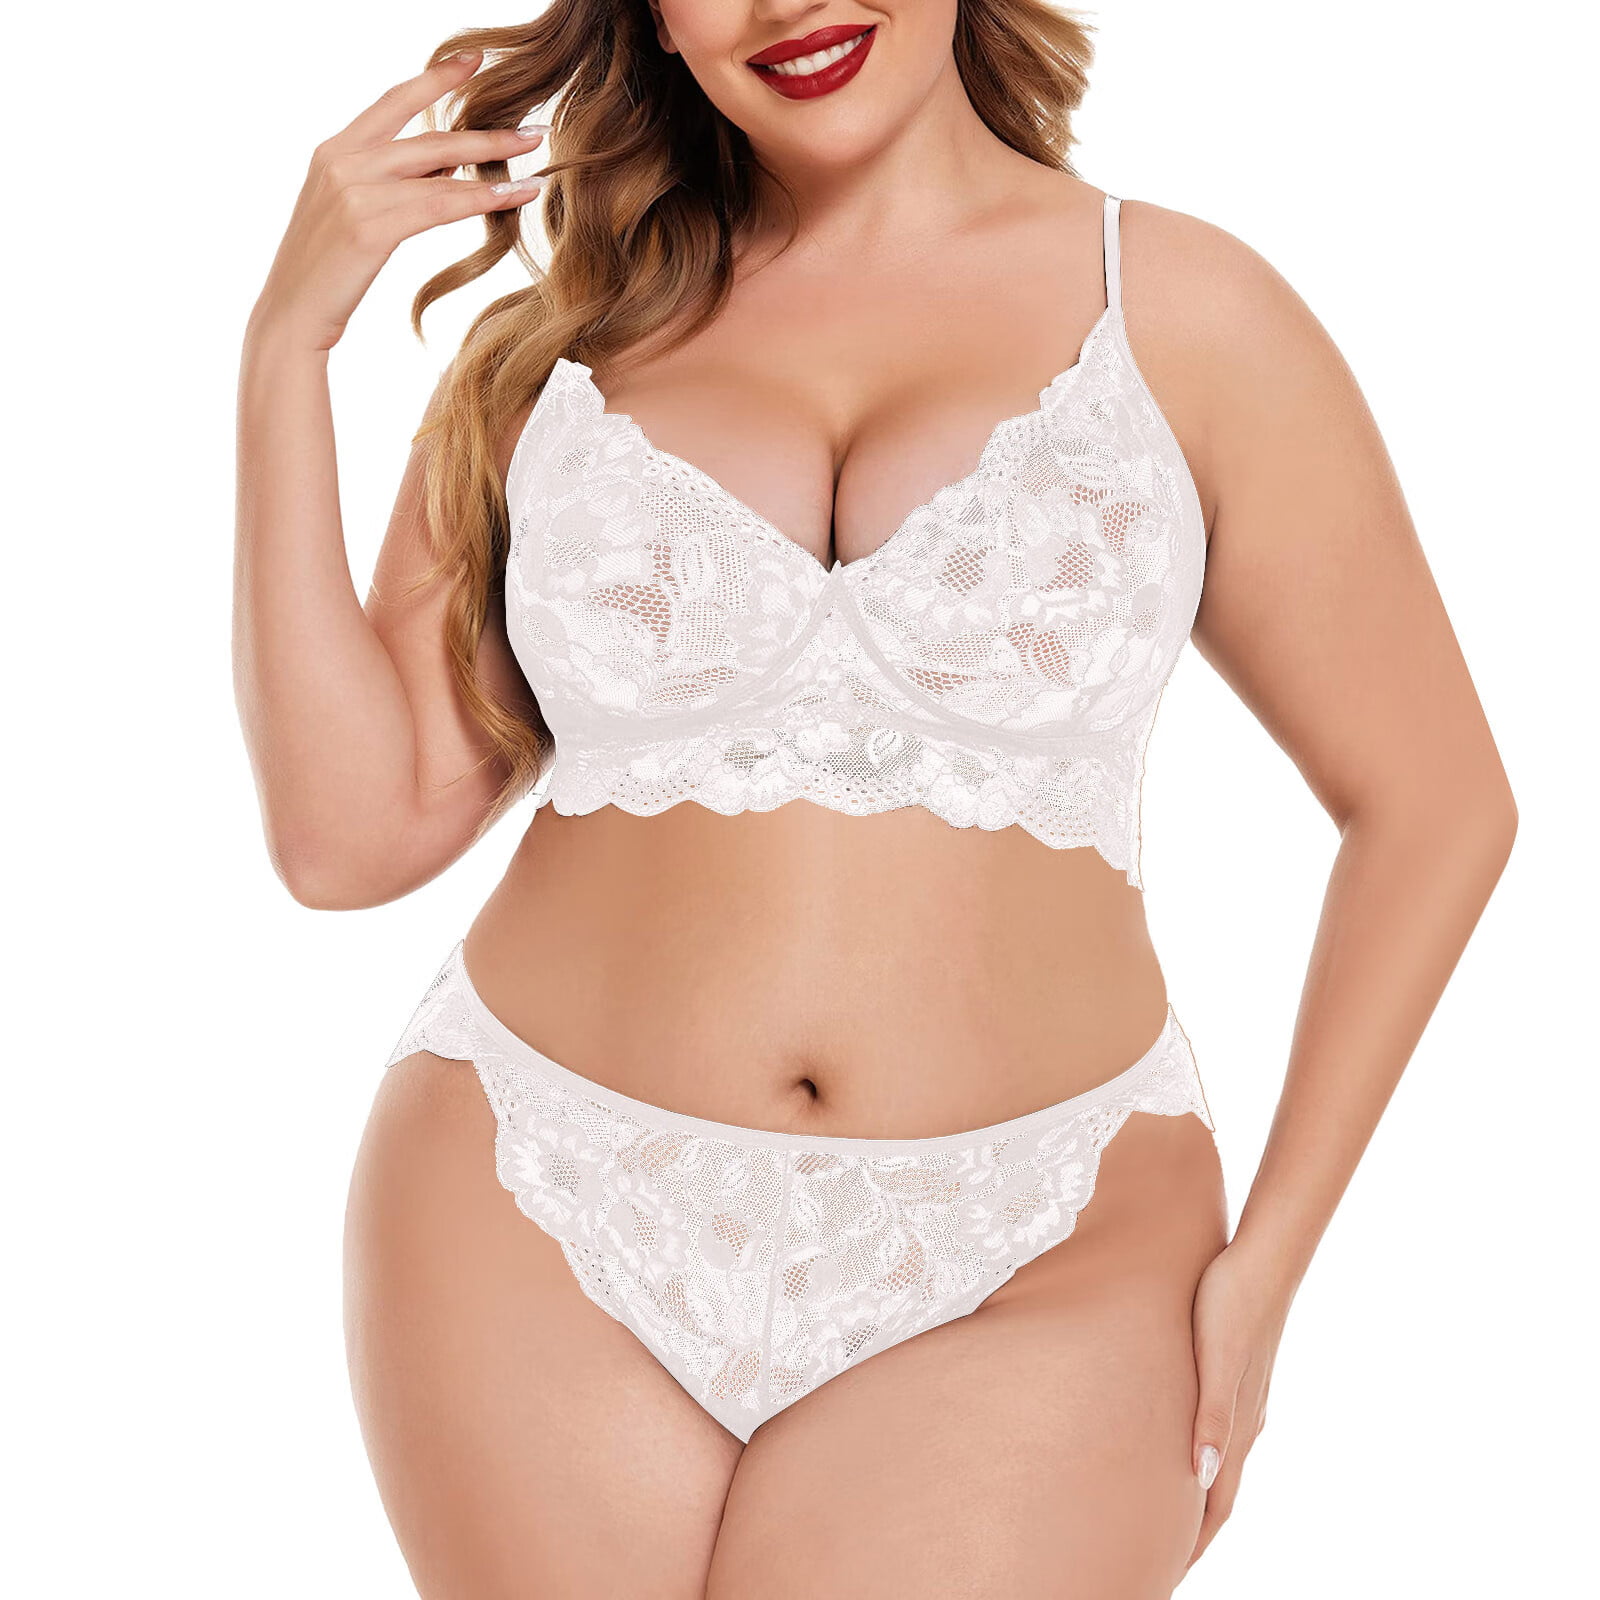 Sehao Underwear Sets for Women Sexy Plus Size Lingerie Lace Bodysuit Exotic  Teddy Lingerie Strappy Bra and Panty With Choker Polyester Lace Thong Plus  Size Panties 